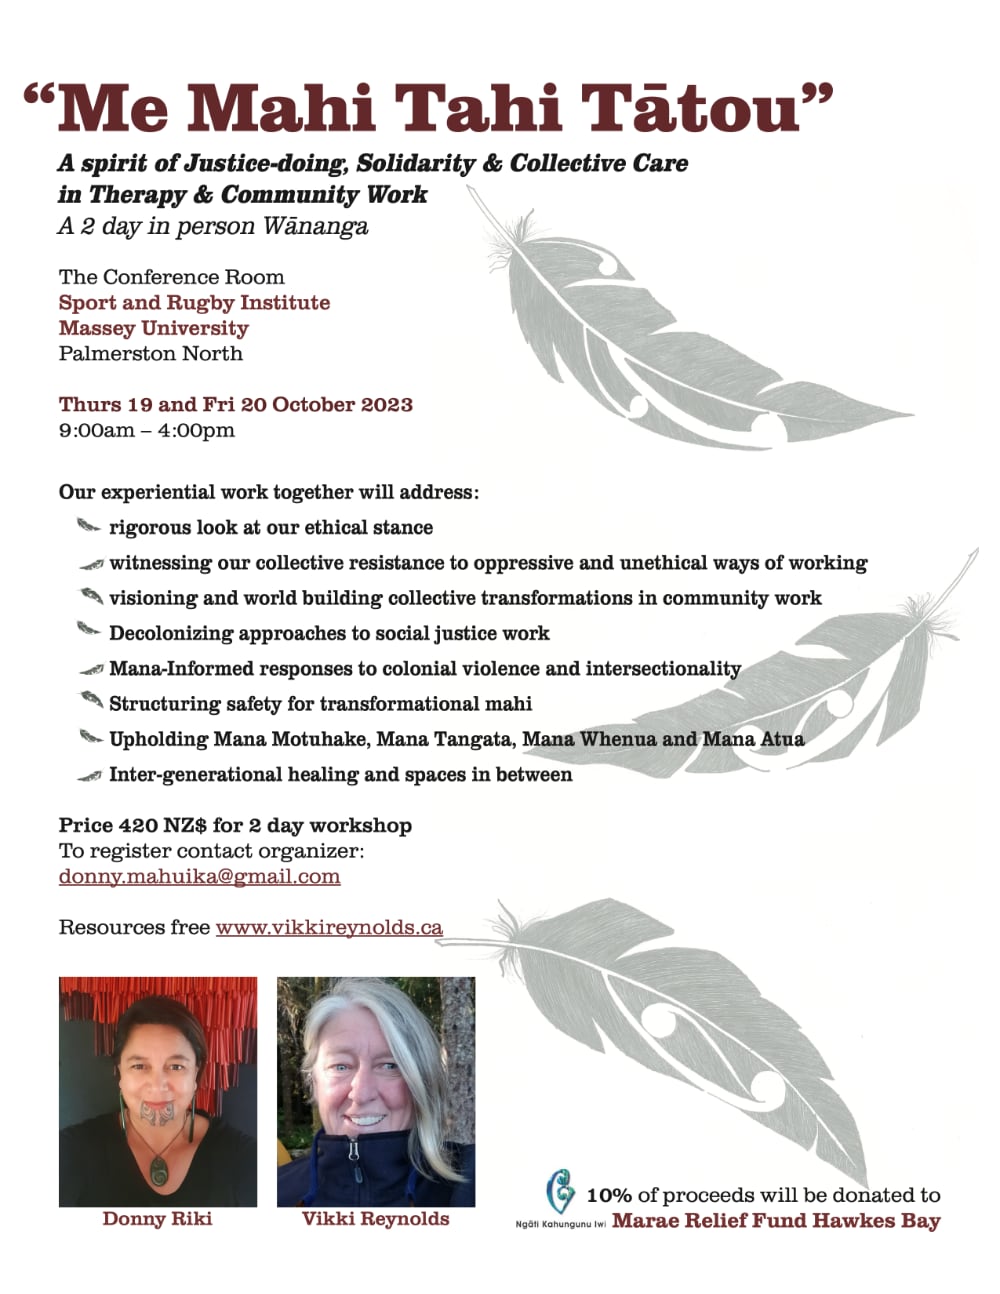 A spirit of Justice-doing, Solidarity & Collective Care in Therapy & Community Work